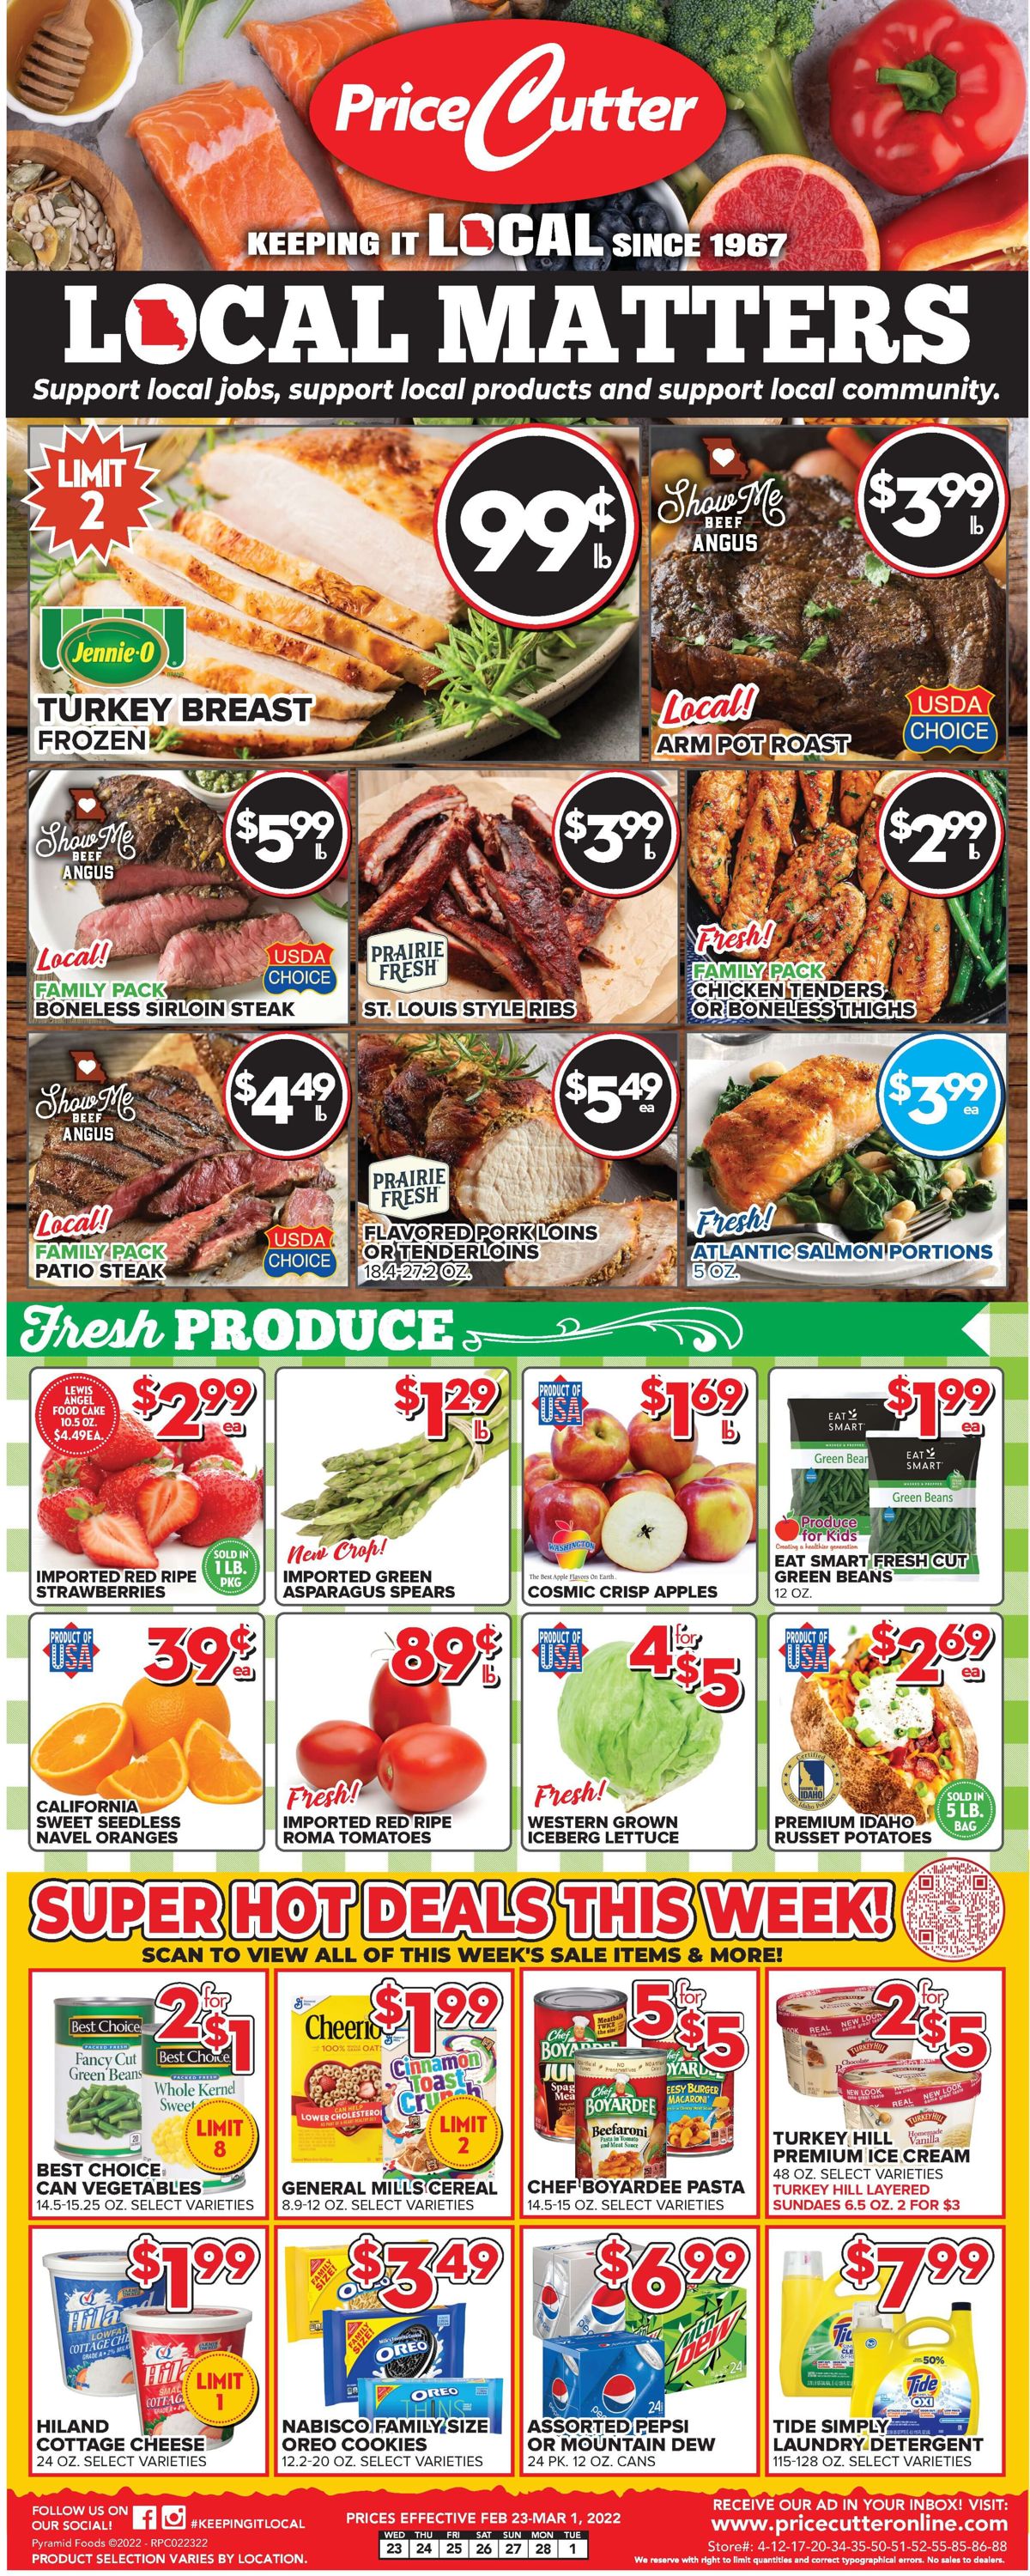 Price Cutter Weekly Ad Circular - valid 02/23-03/01/2022